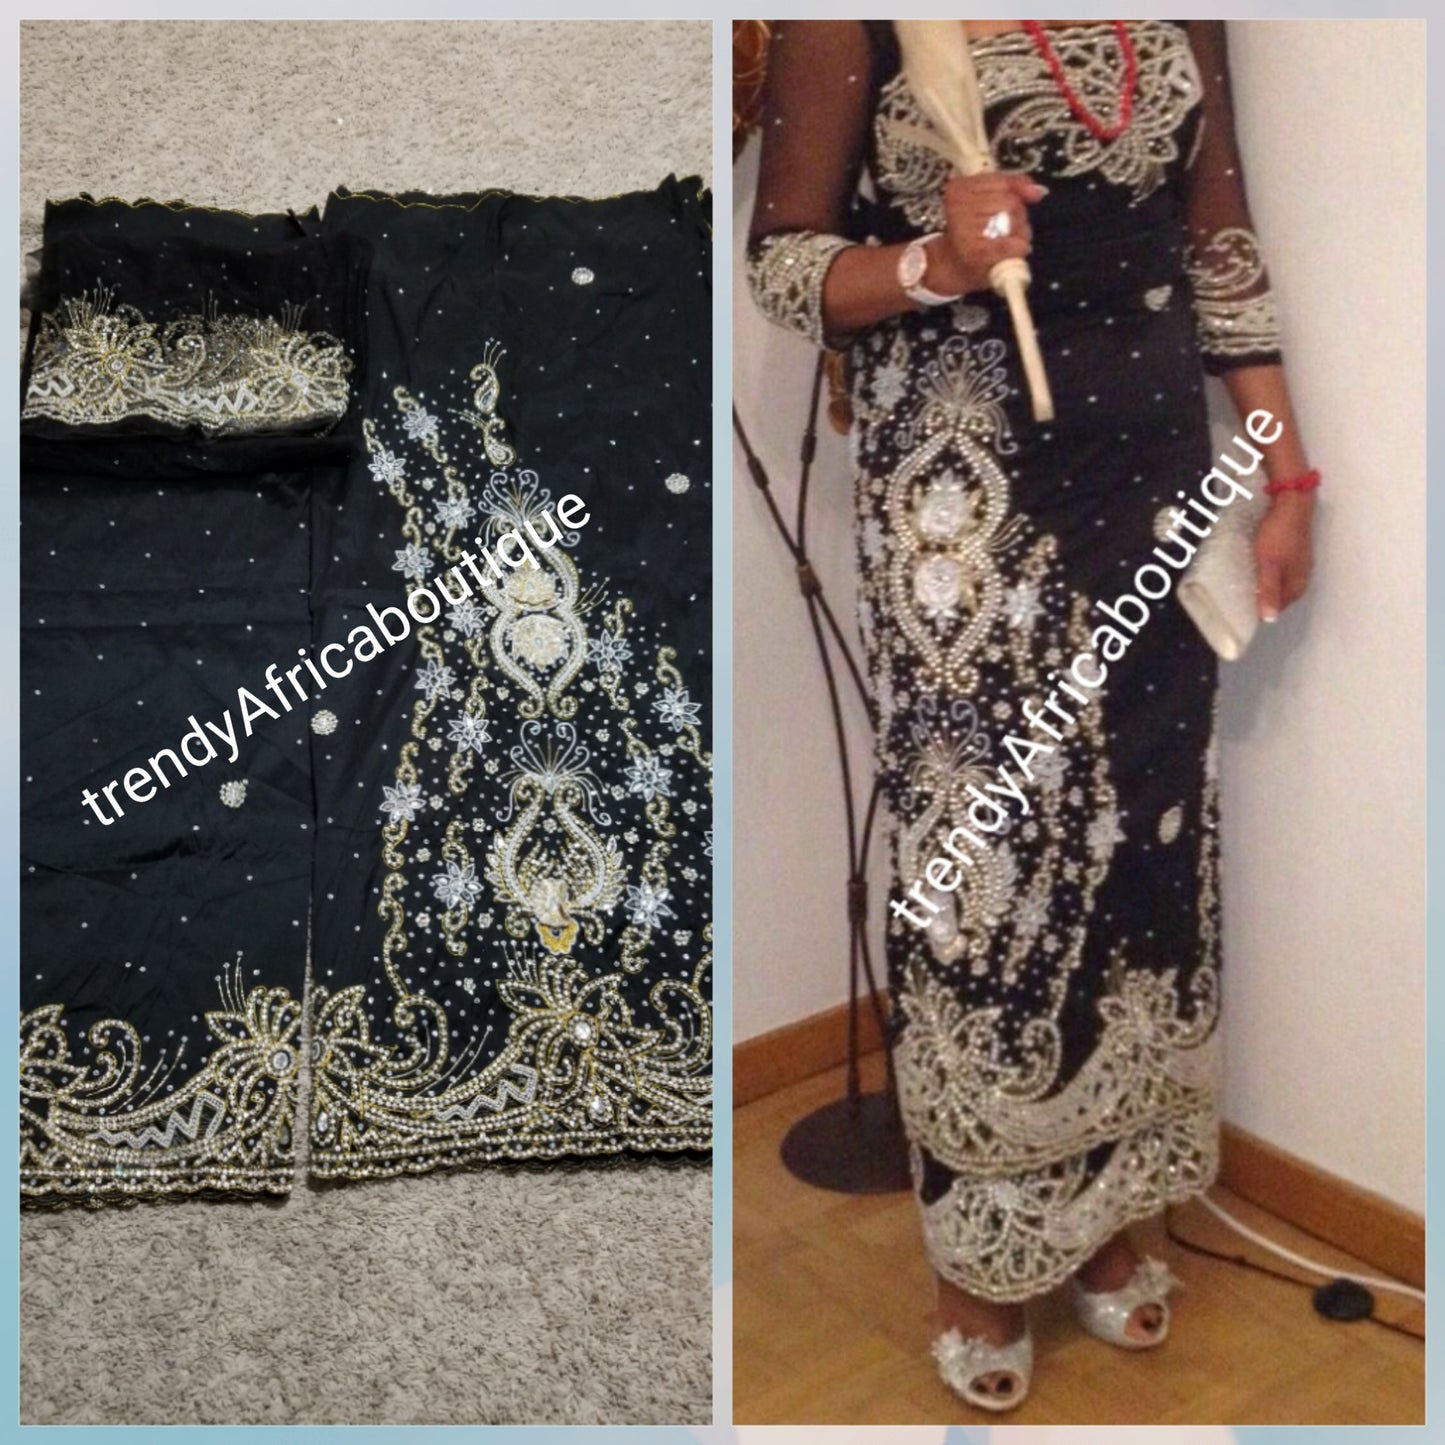 1st lady Igbo  Traditional wedding hand stoned Silk George wrapper. Black Big  madam celebrant 2.5yds + 2.5yds wrapper + matching blouse as shown on model